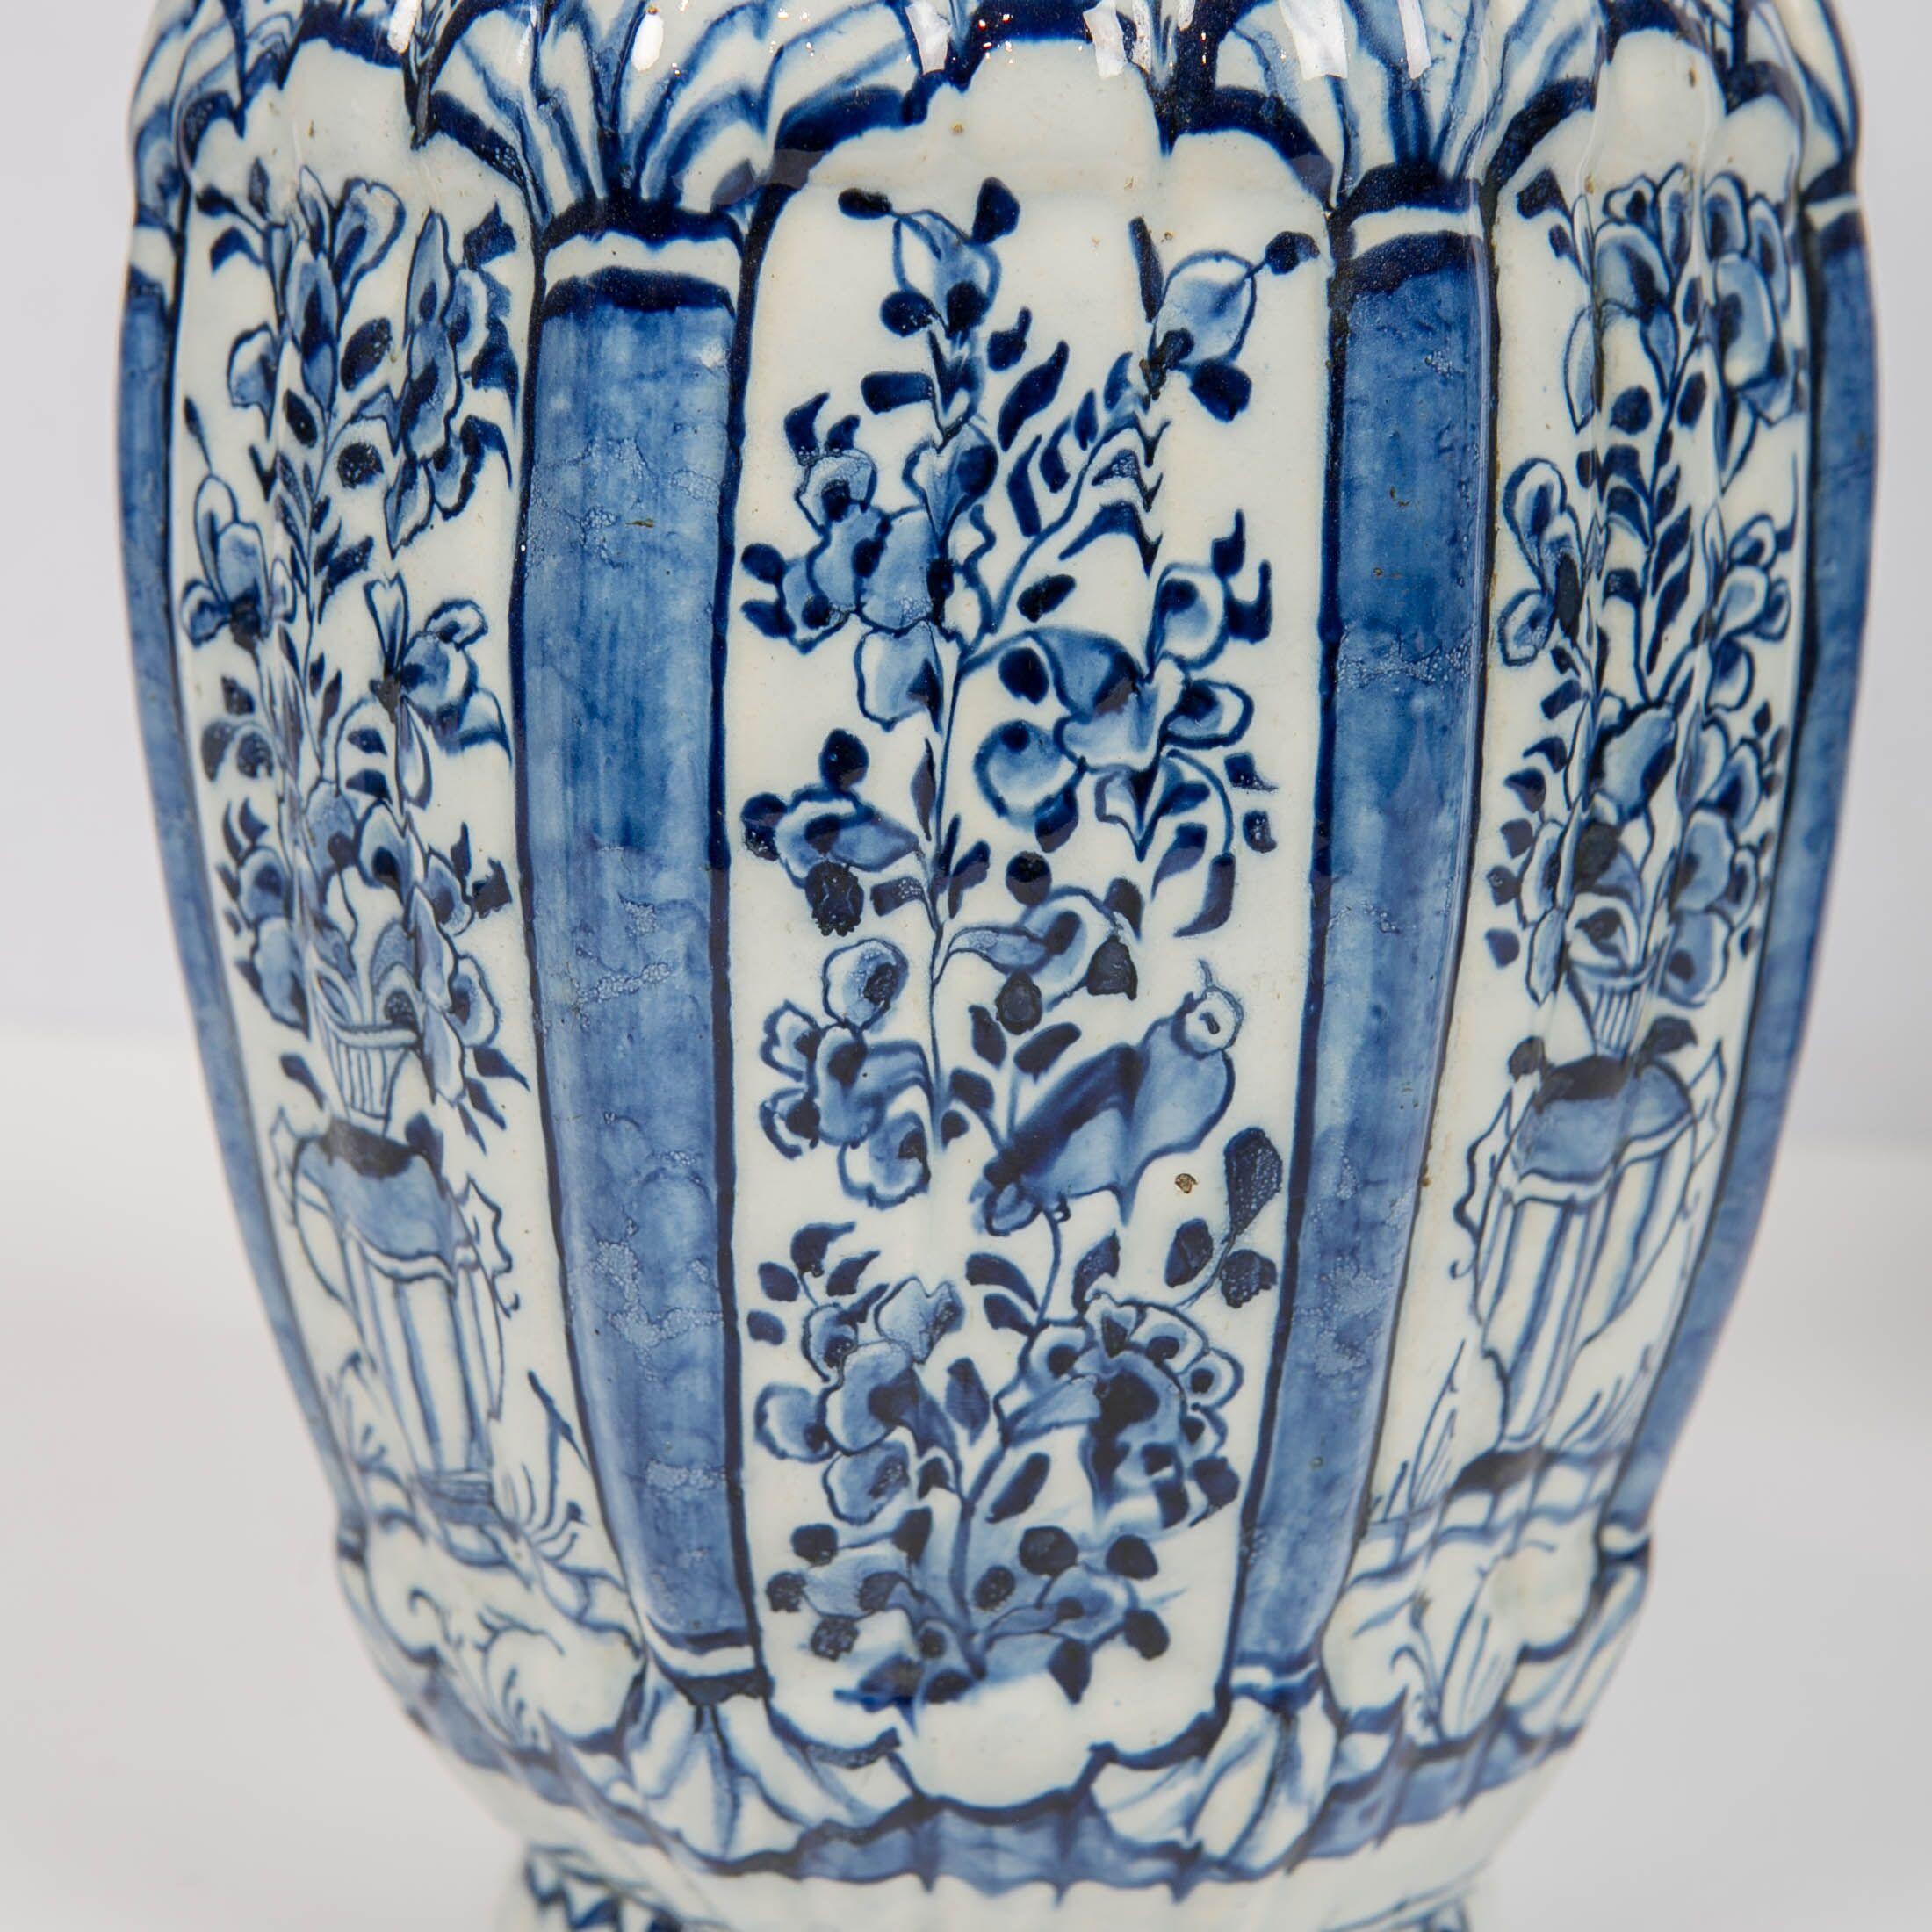 Hand-Painted Delft Blue and White Jars with Lion Finials Made circa 1780